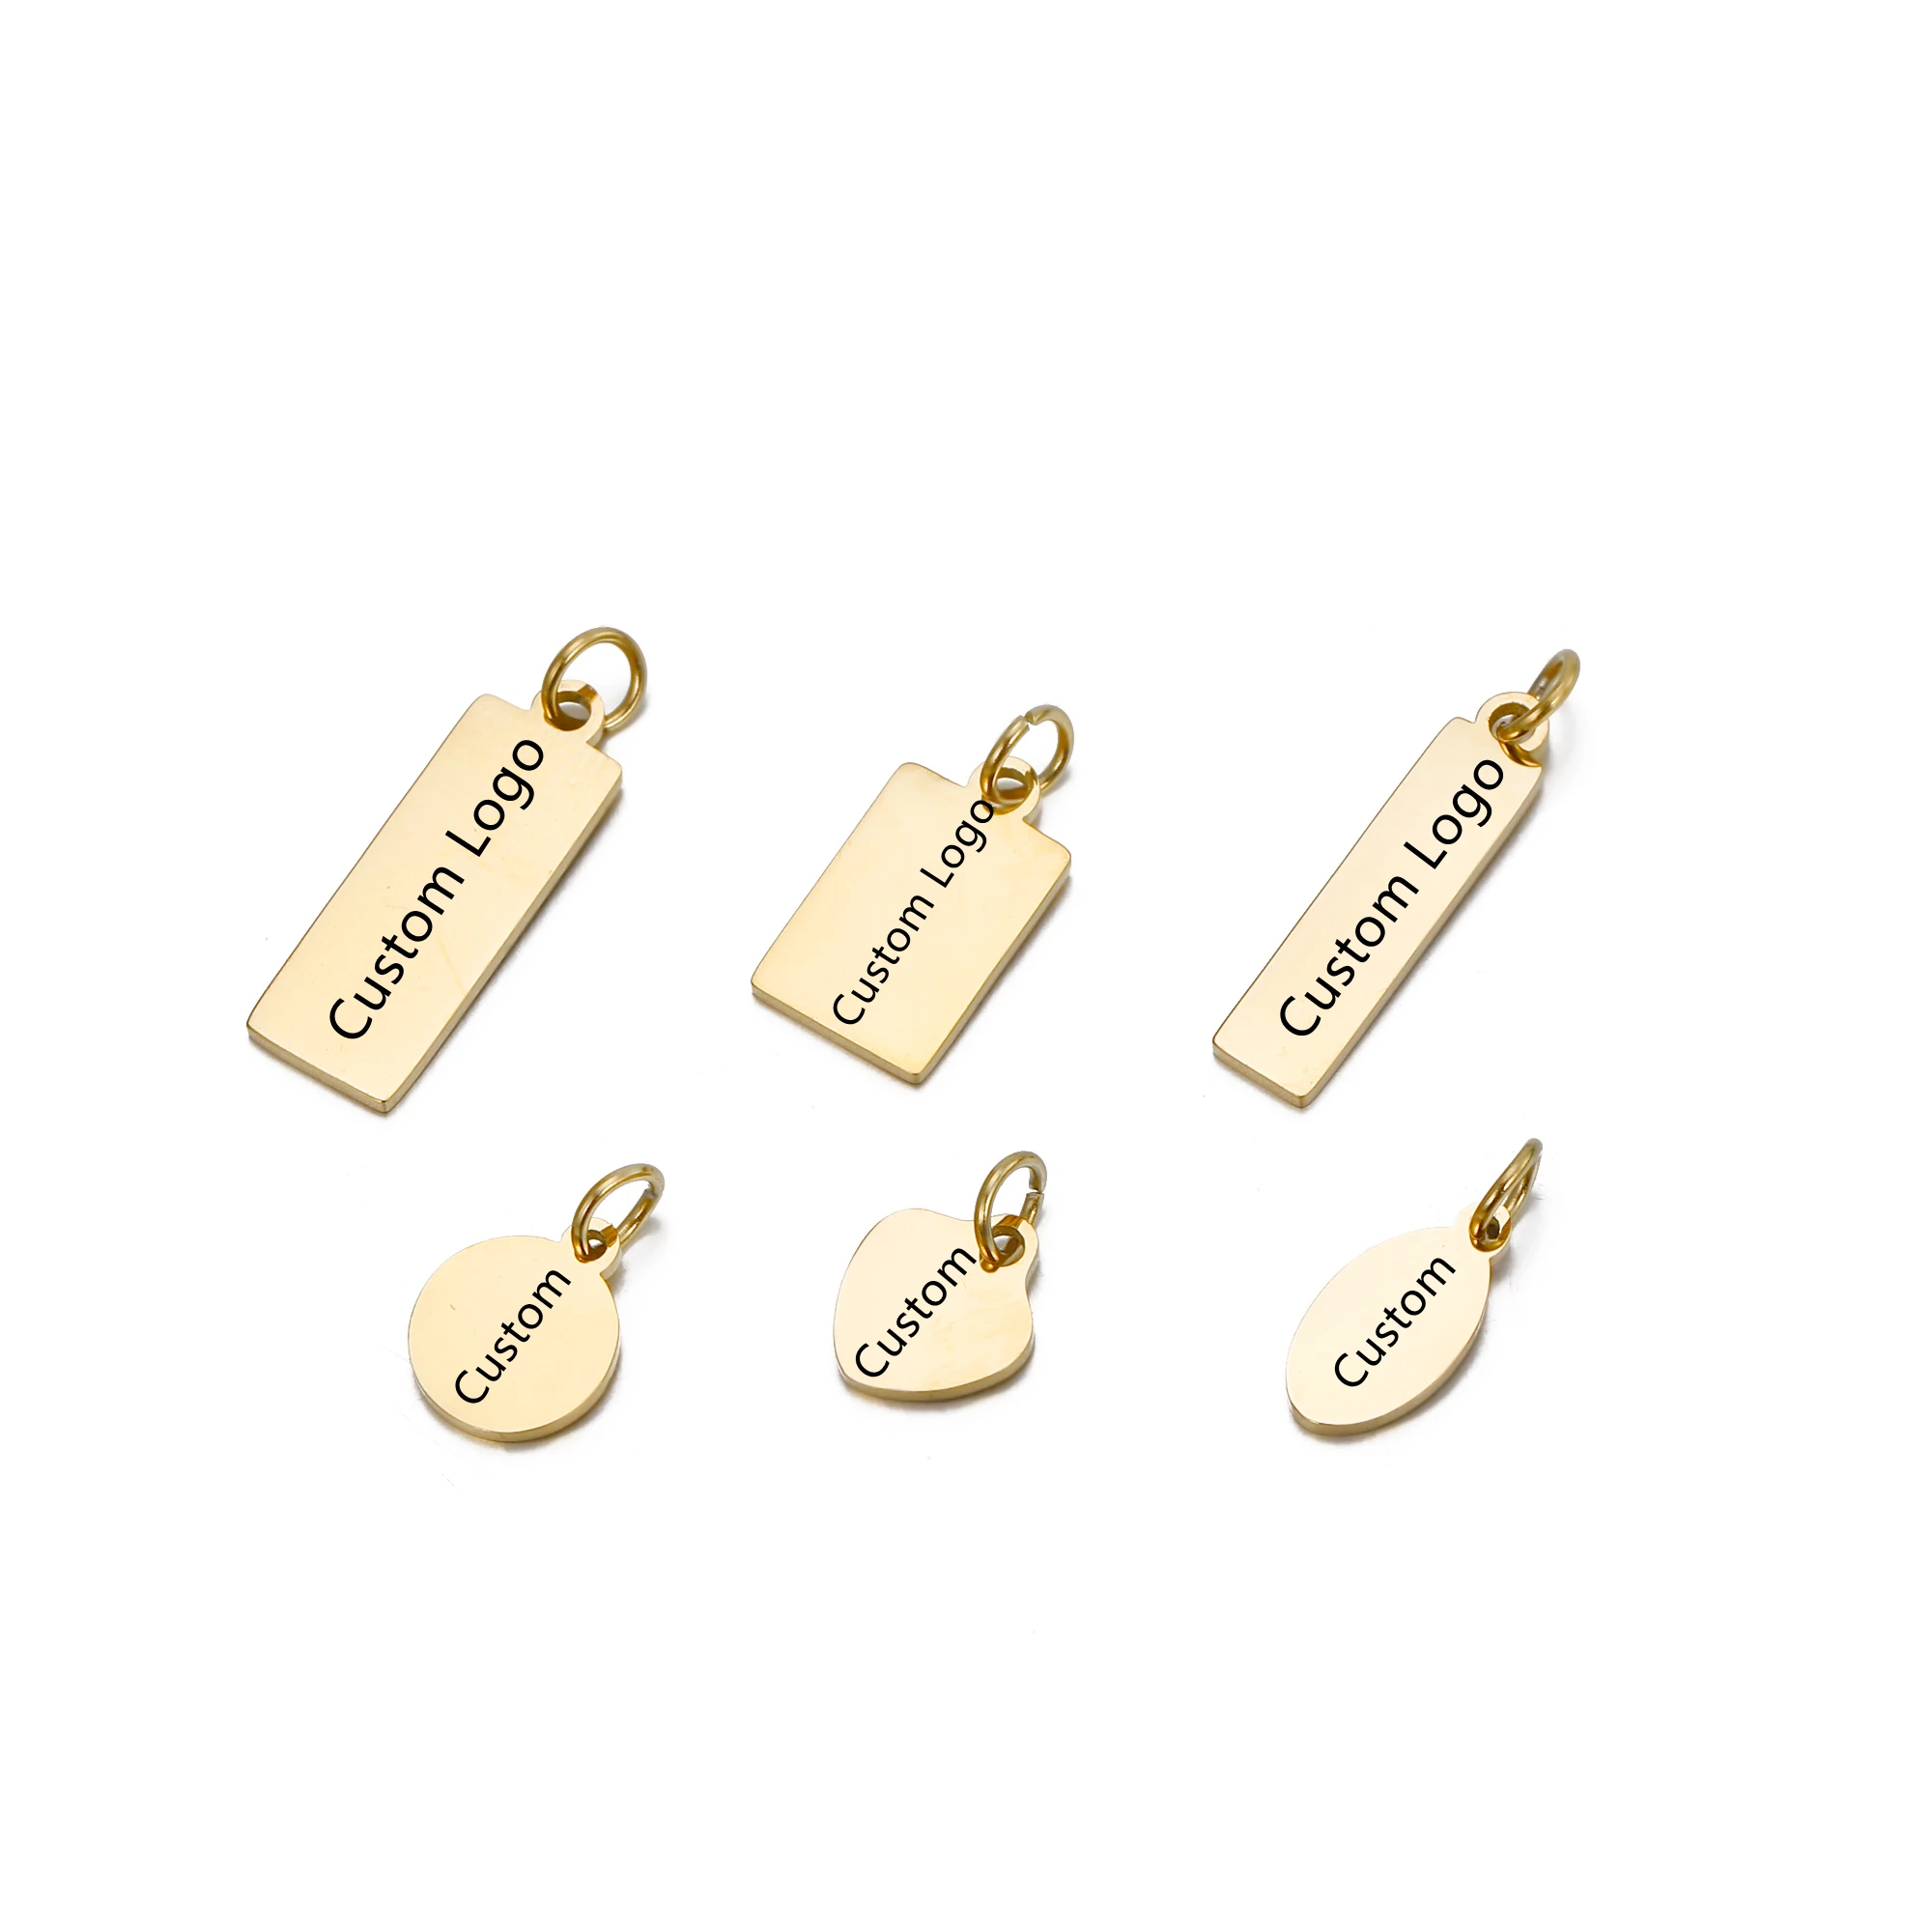 

316L Stainless Steel Jewelry findings Charms Small Brand Logo Pendants Custom Engraved Logo Tags Pendant for Bracelets Necklaces, Rose gold, 14k gold, silver